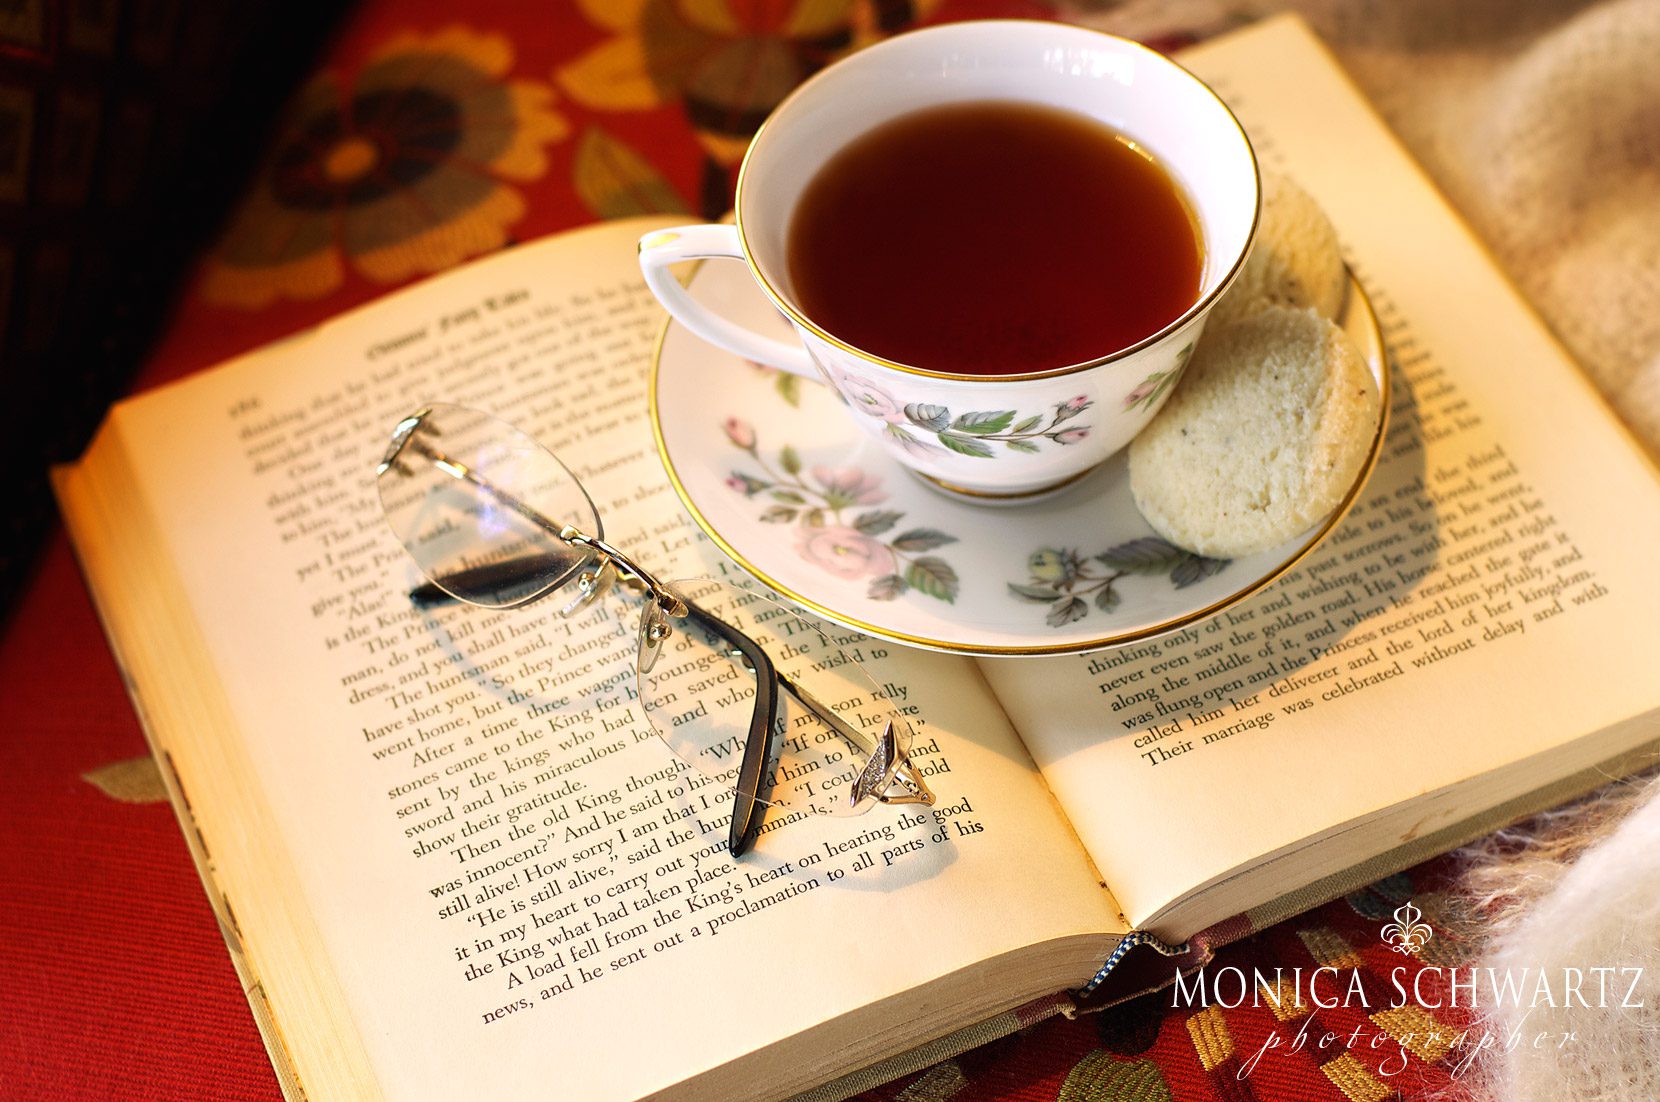 The-comfort-of-reading-a-good-book-curled-up-on-an-armchair-under-a-blanket-and-with-a-cup-of-tea